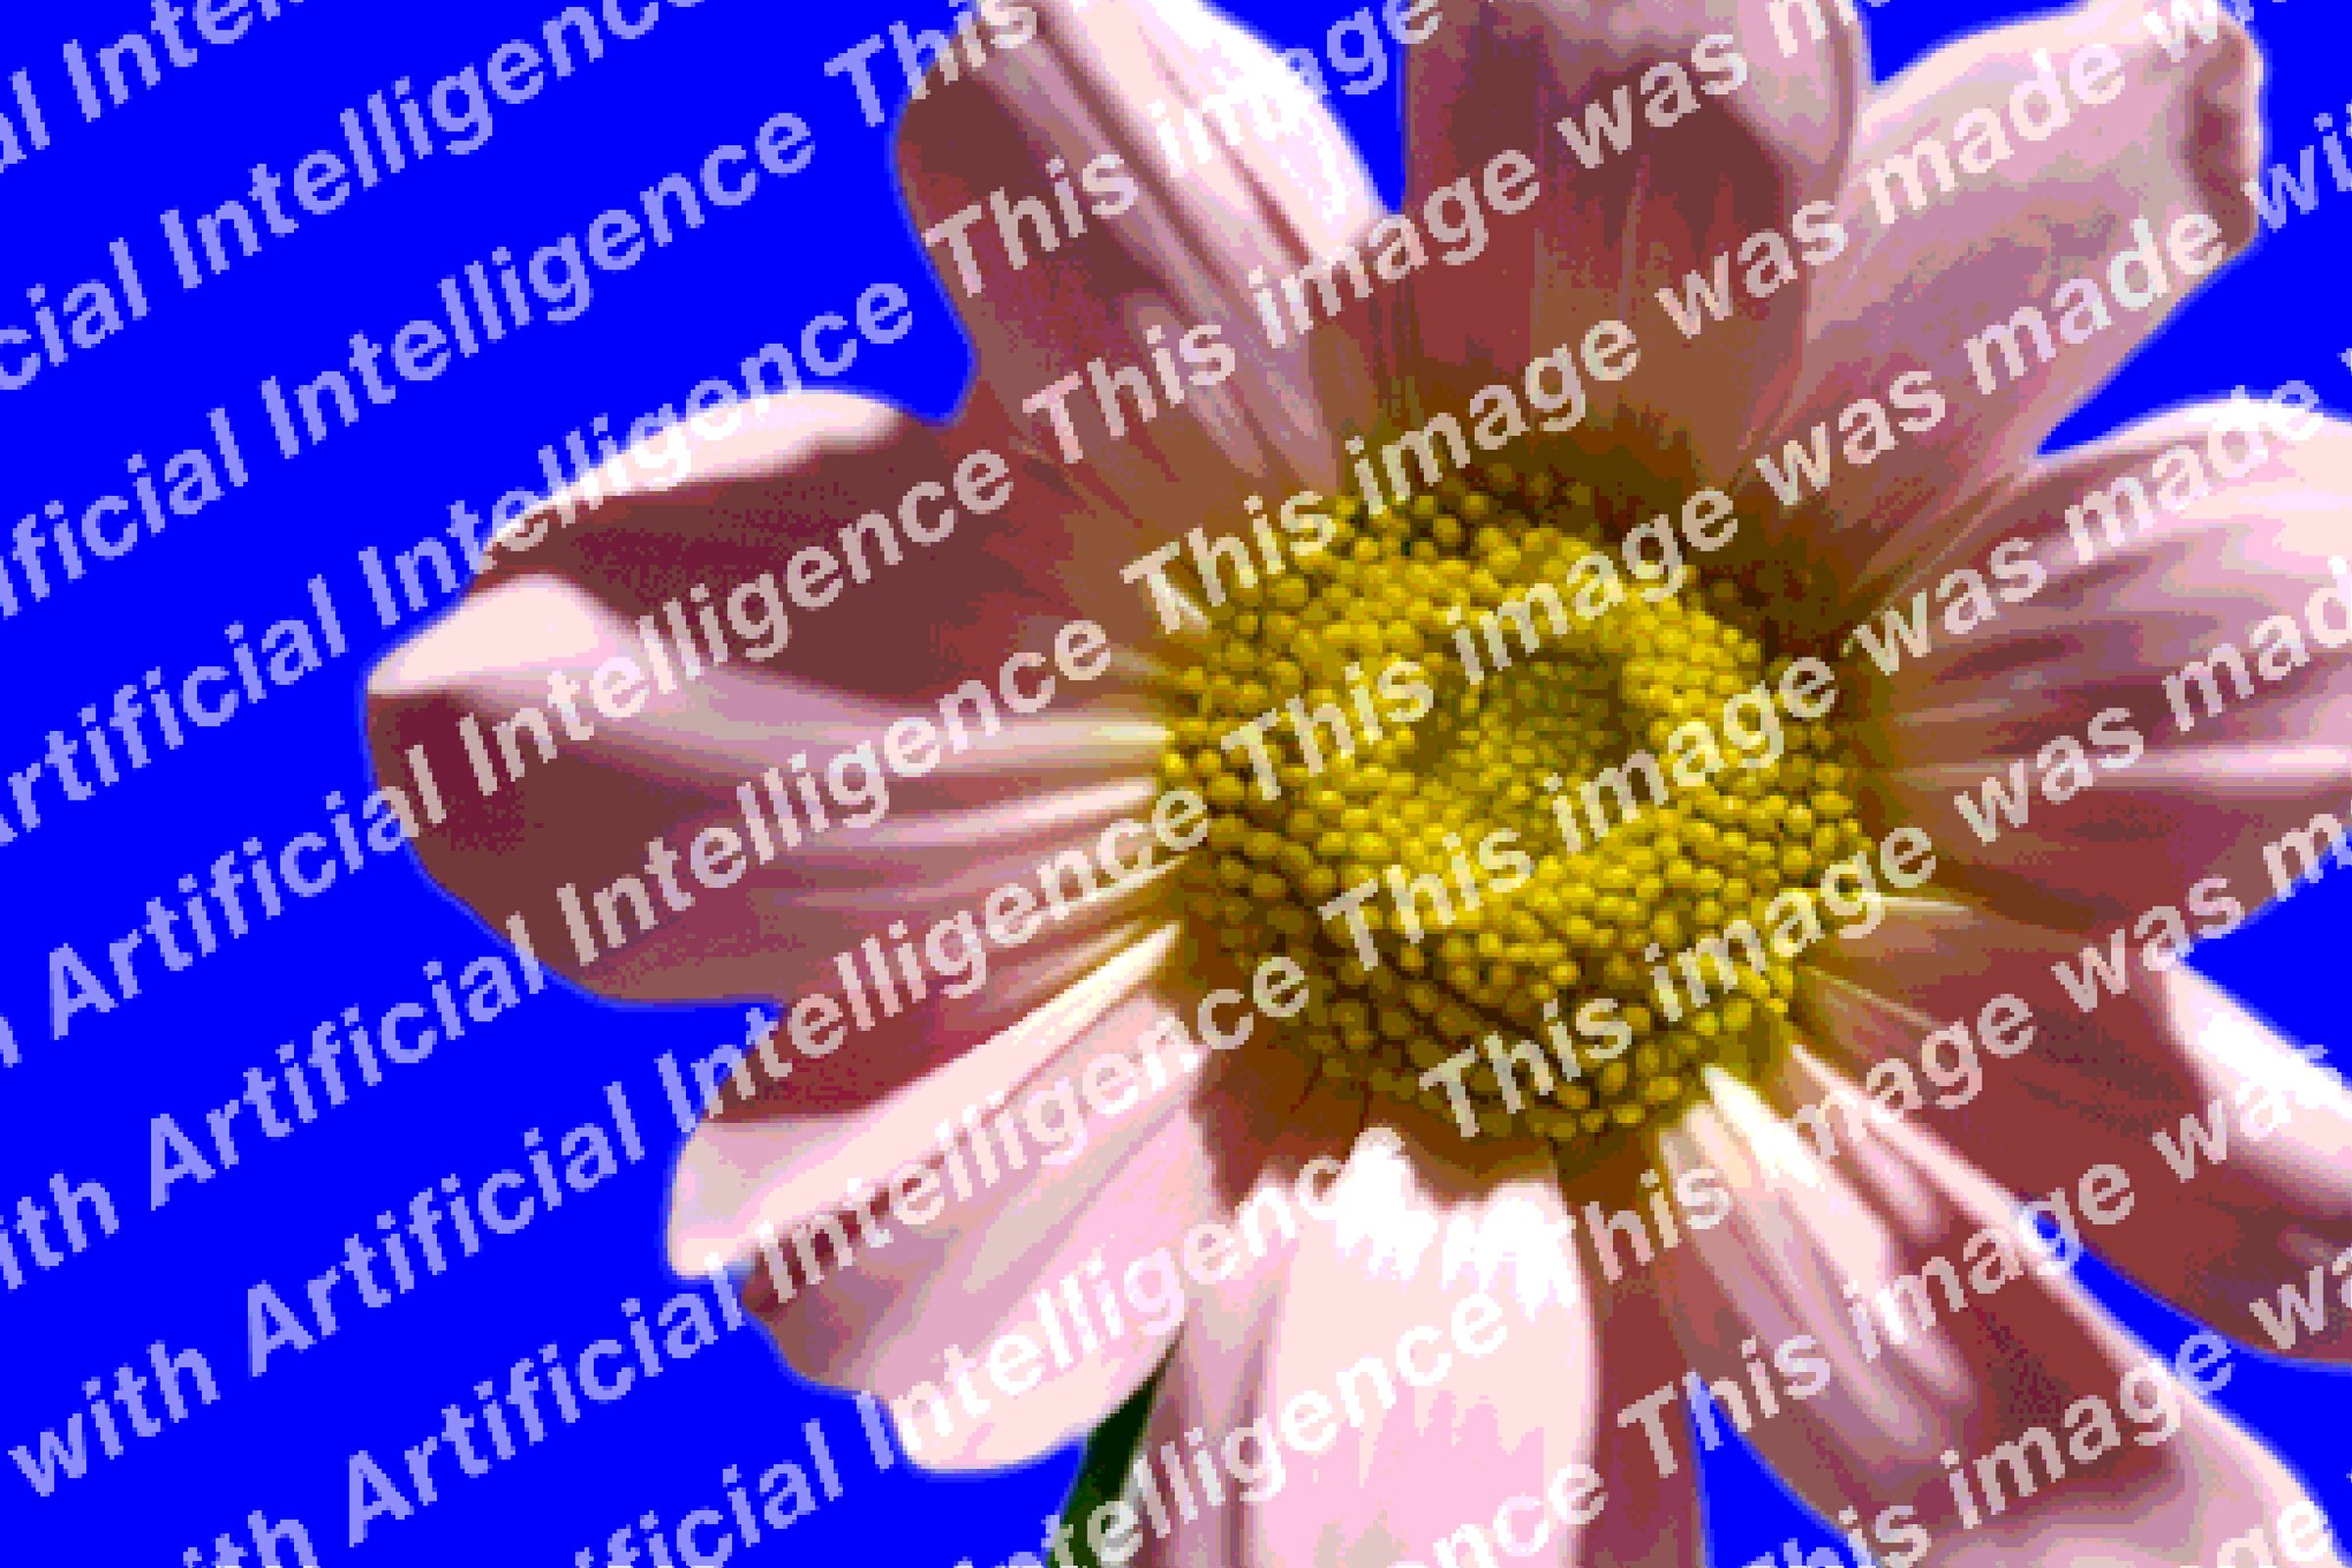 Photo of a flower covered in a watermark stating the image was made by artificial intelligence.